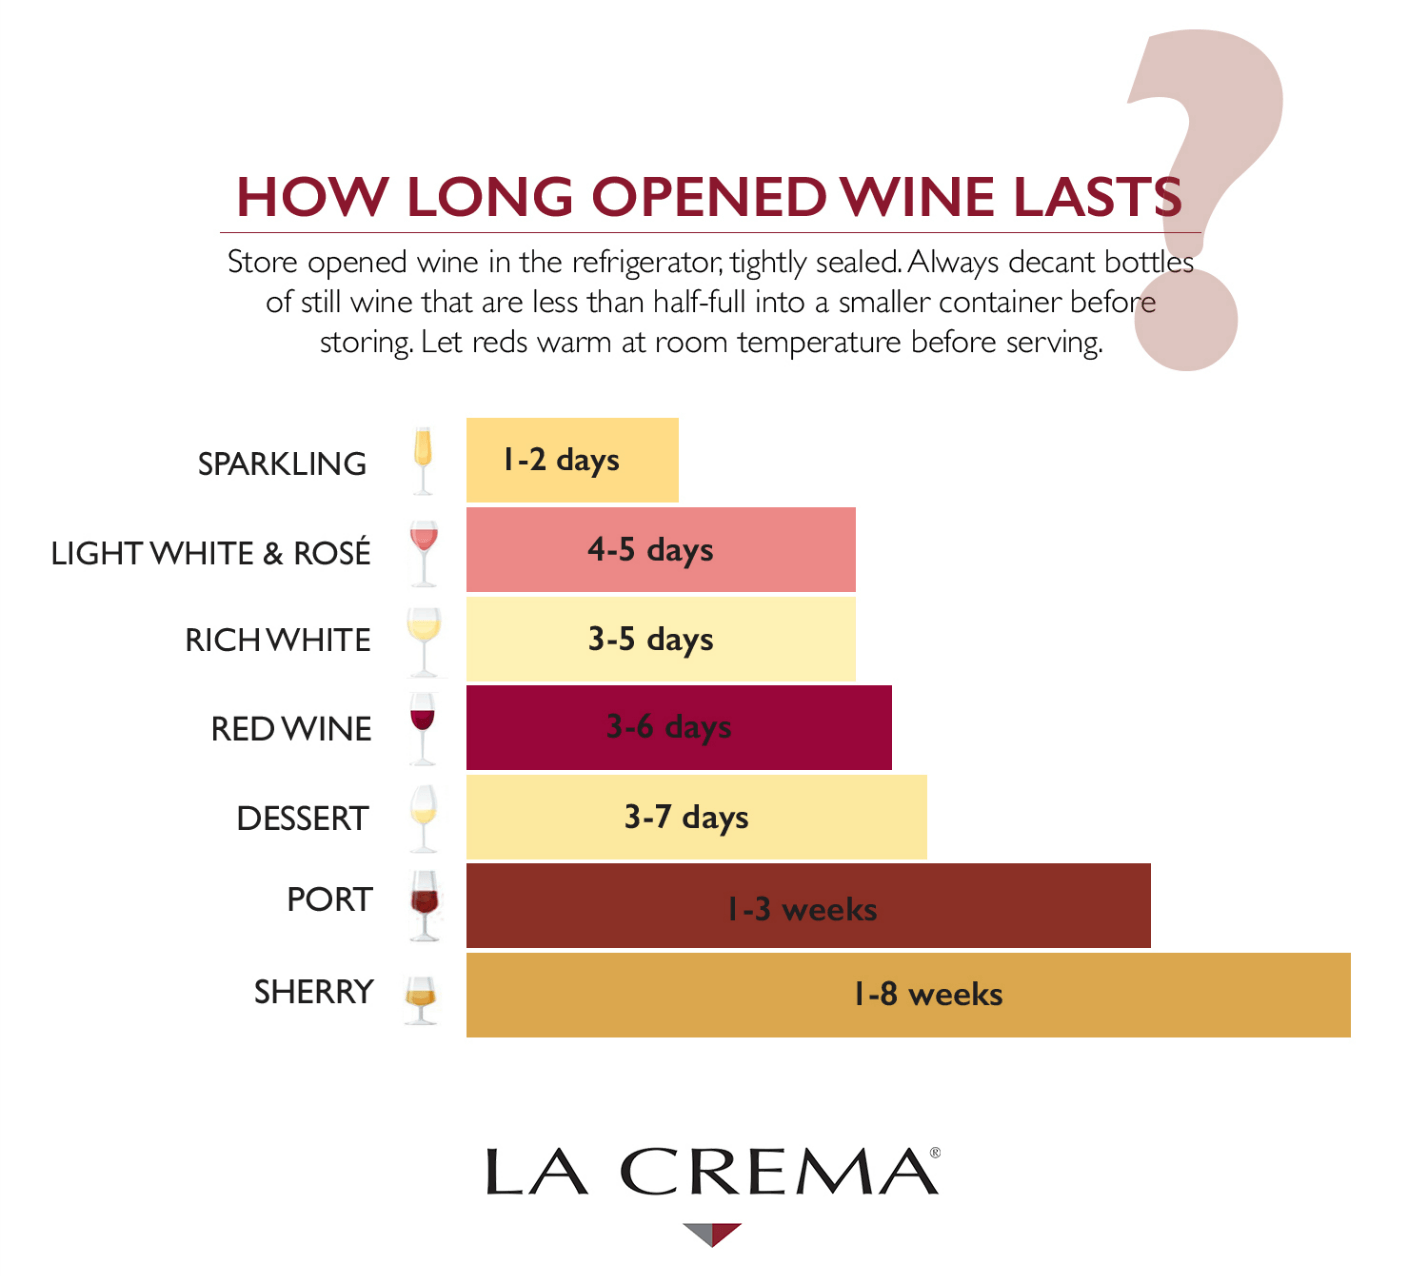 How Long Does Opened Wine Last